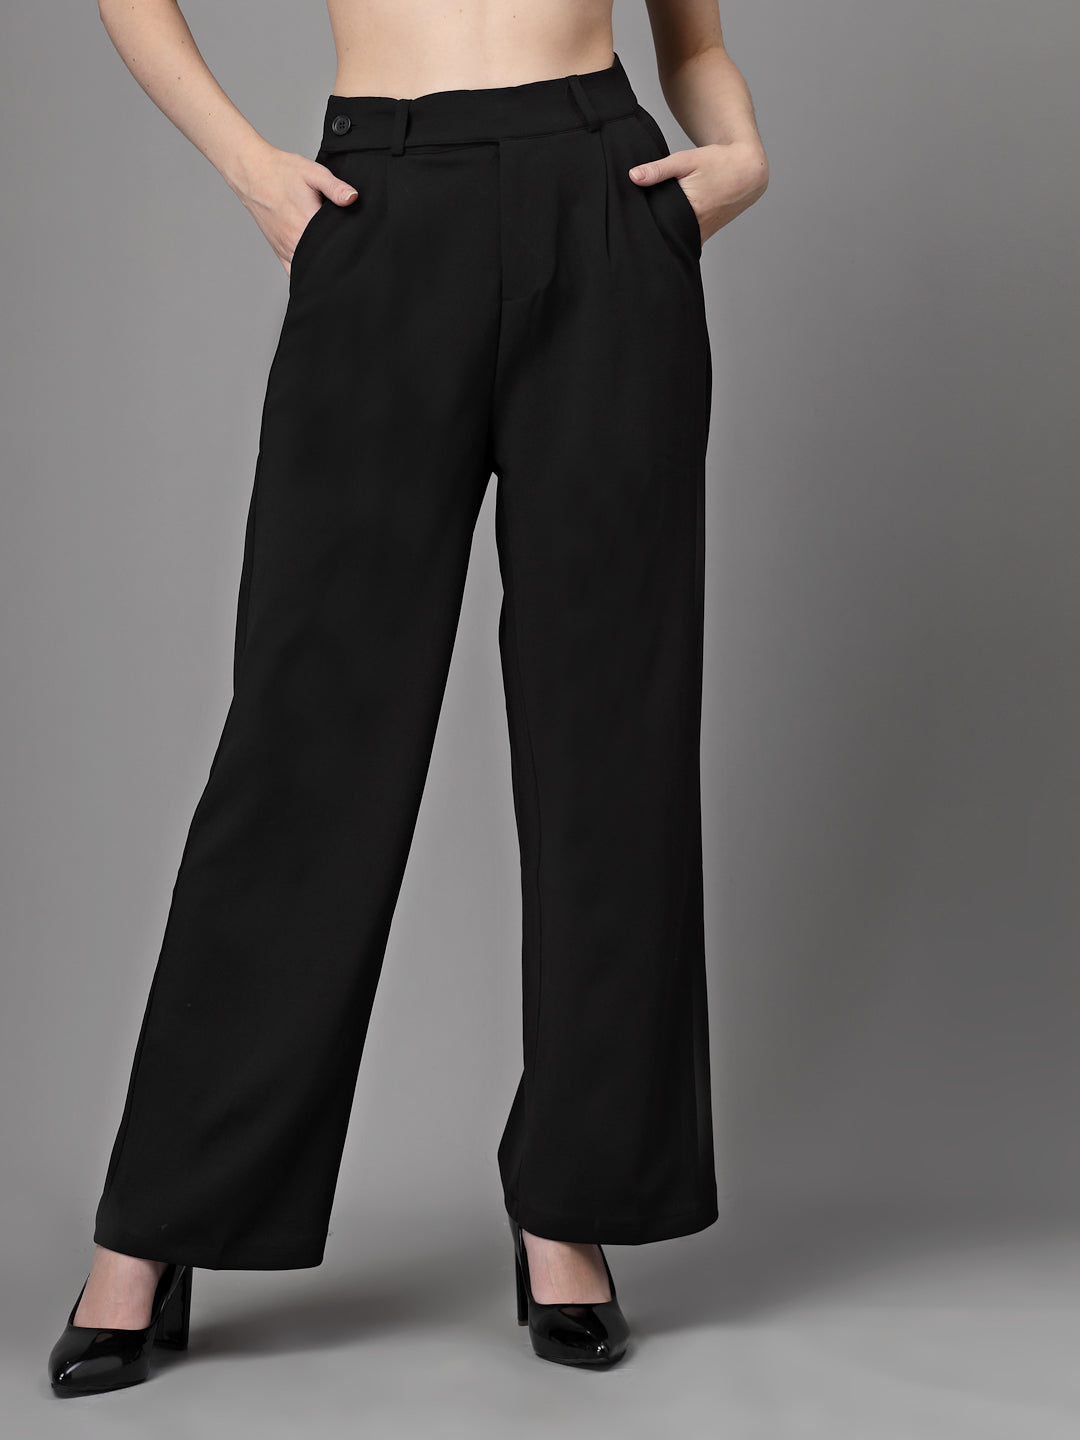 Monochromatic Work Outfit: Petite Black Wide Leg Trouser Pants | Black wide  leg trousers outfit, Wide leg trousers outfit, Wide leg pants outfit work